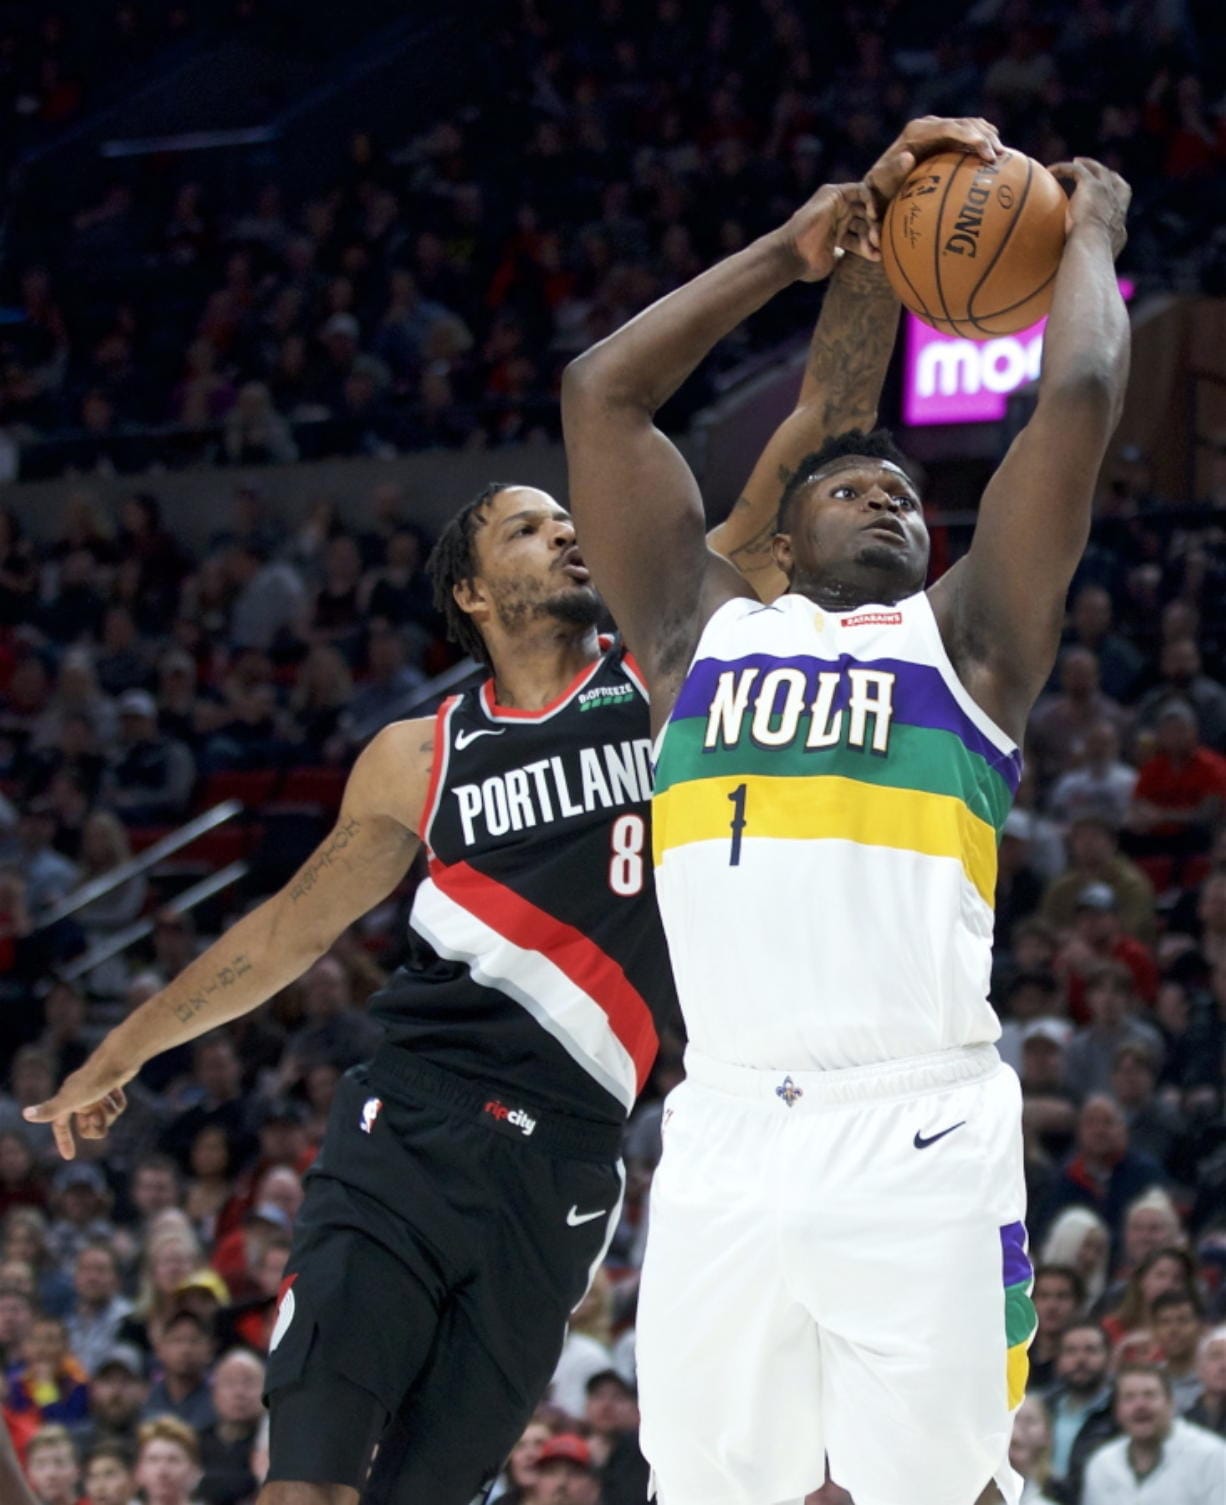 New Orleans Pelicans forward Zion Williamson, right, shoots and scores despite the defense of Portland Trail Blazers forward Trevor Ariza during the first half of an NBA basketball game in Portland, Ore., Friday, Feb. 21, 2020.